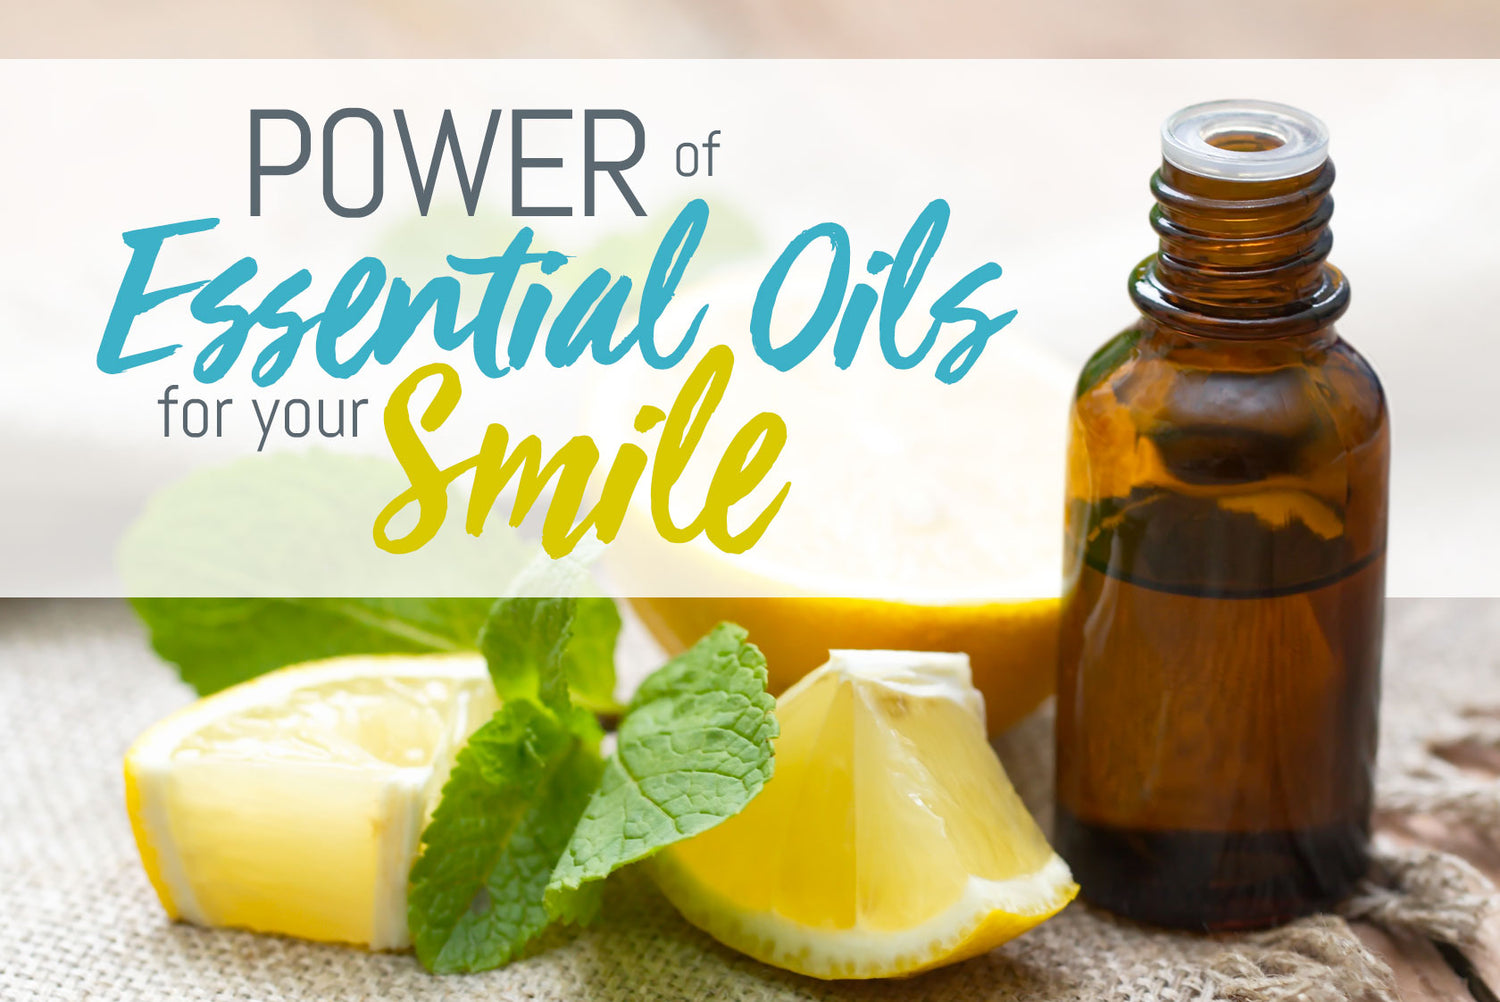 Oxyfresh - Essential oils for your smile good for dental benefits